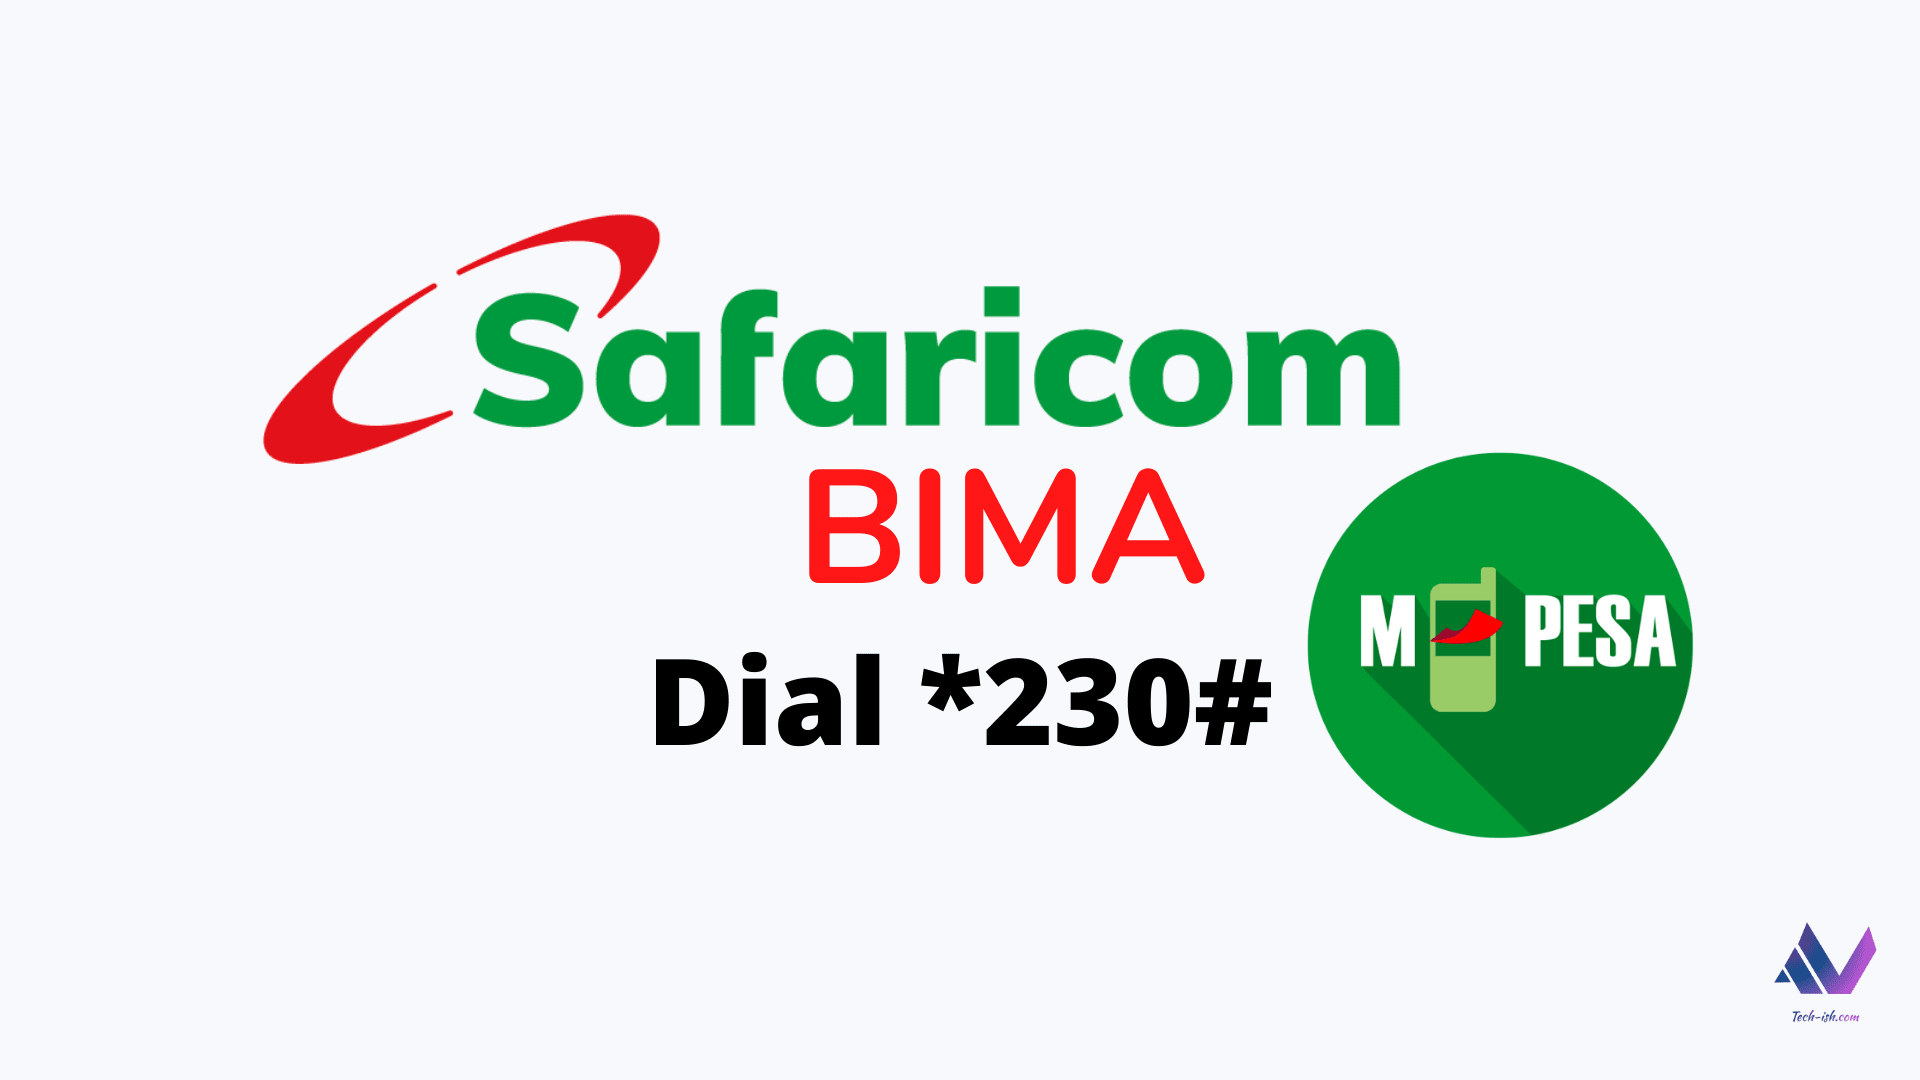 What is Safaricom Bima and how will it work?